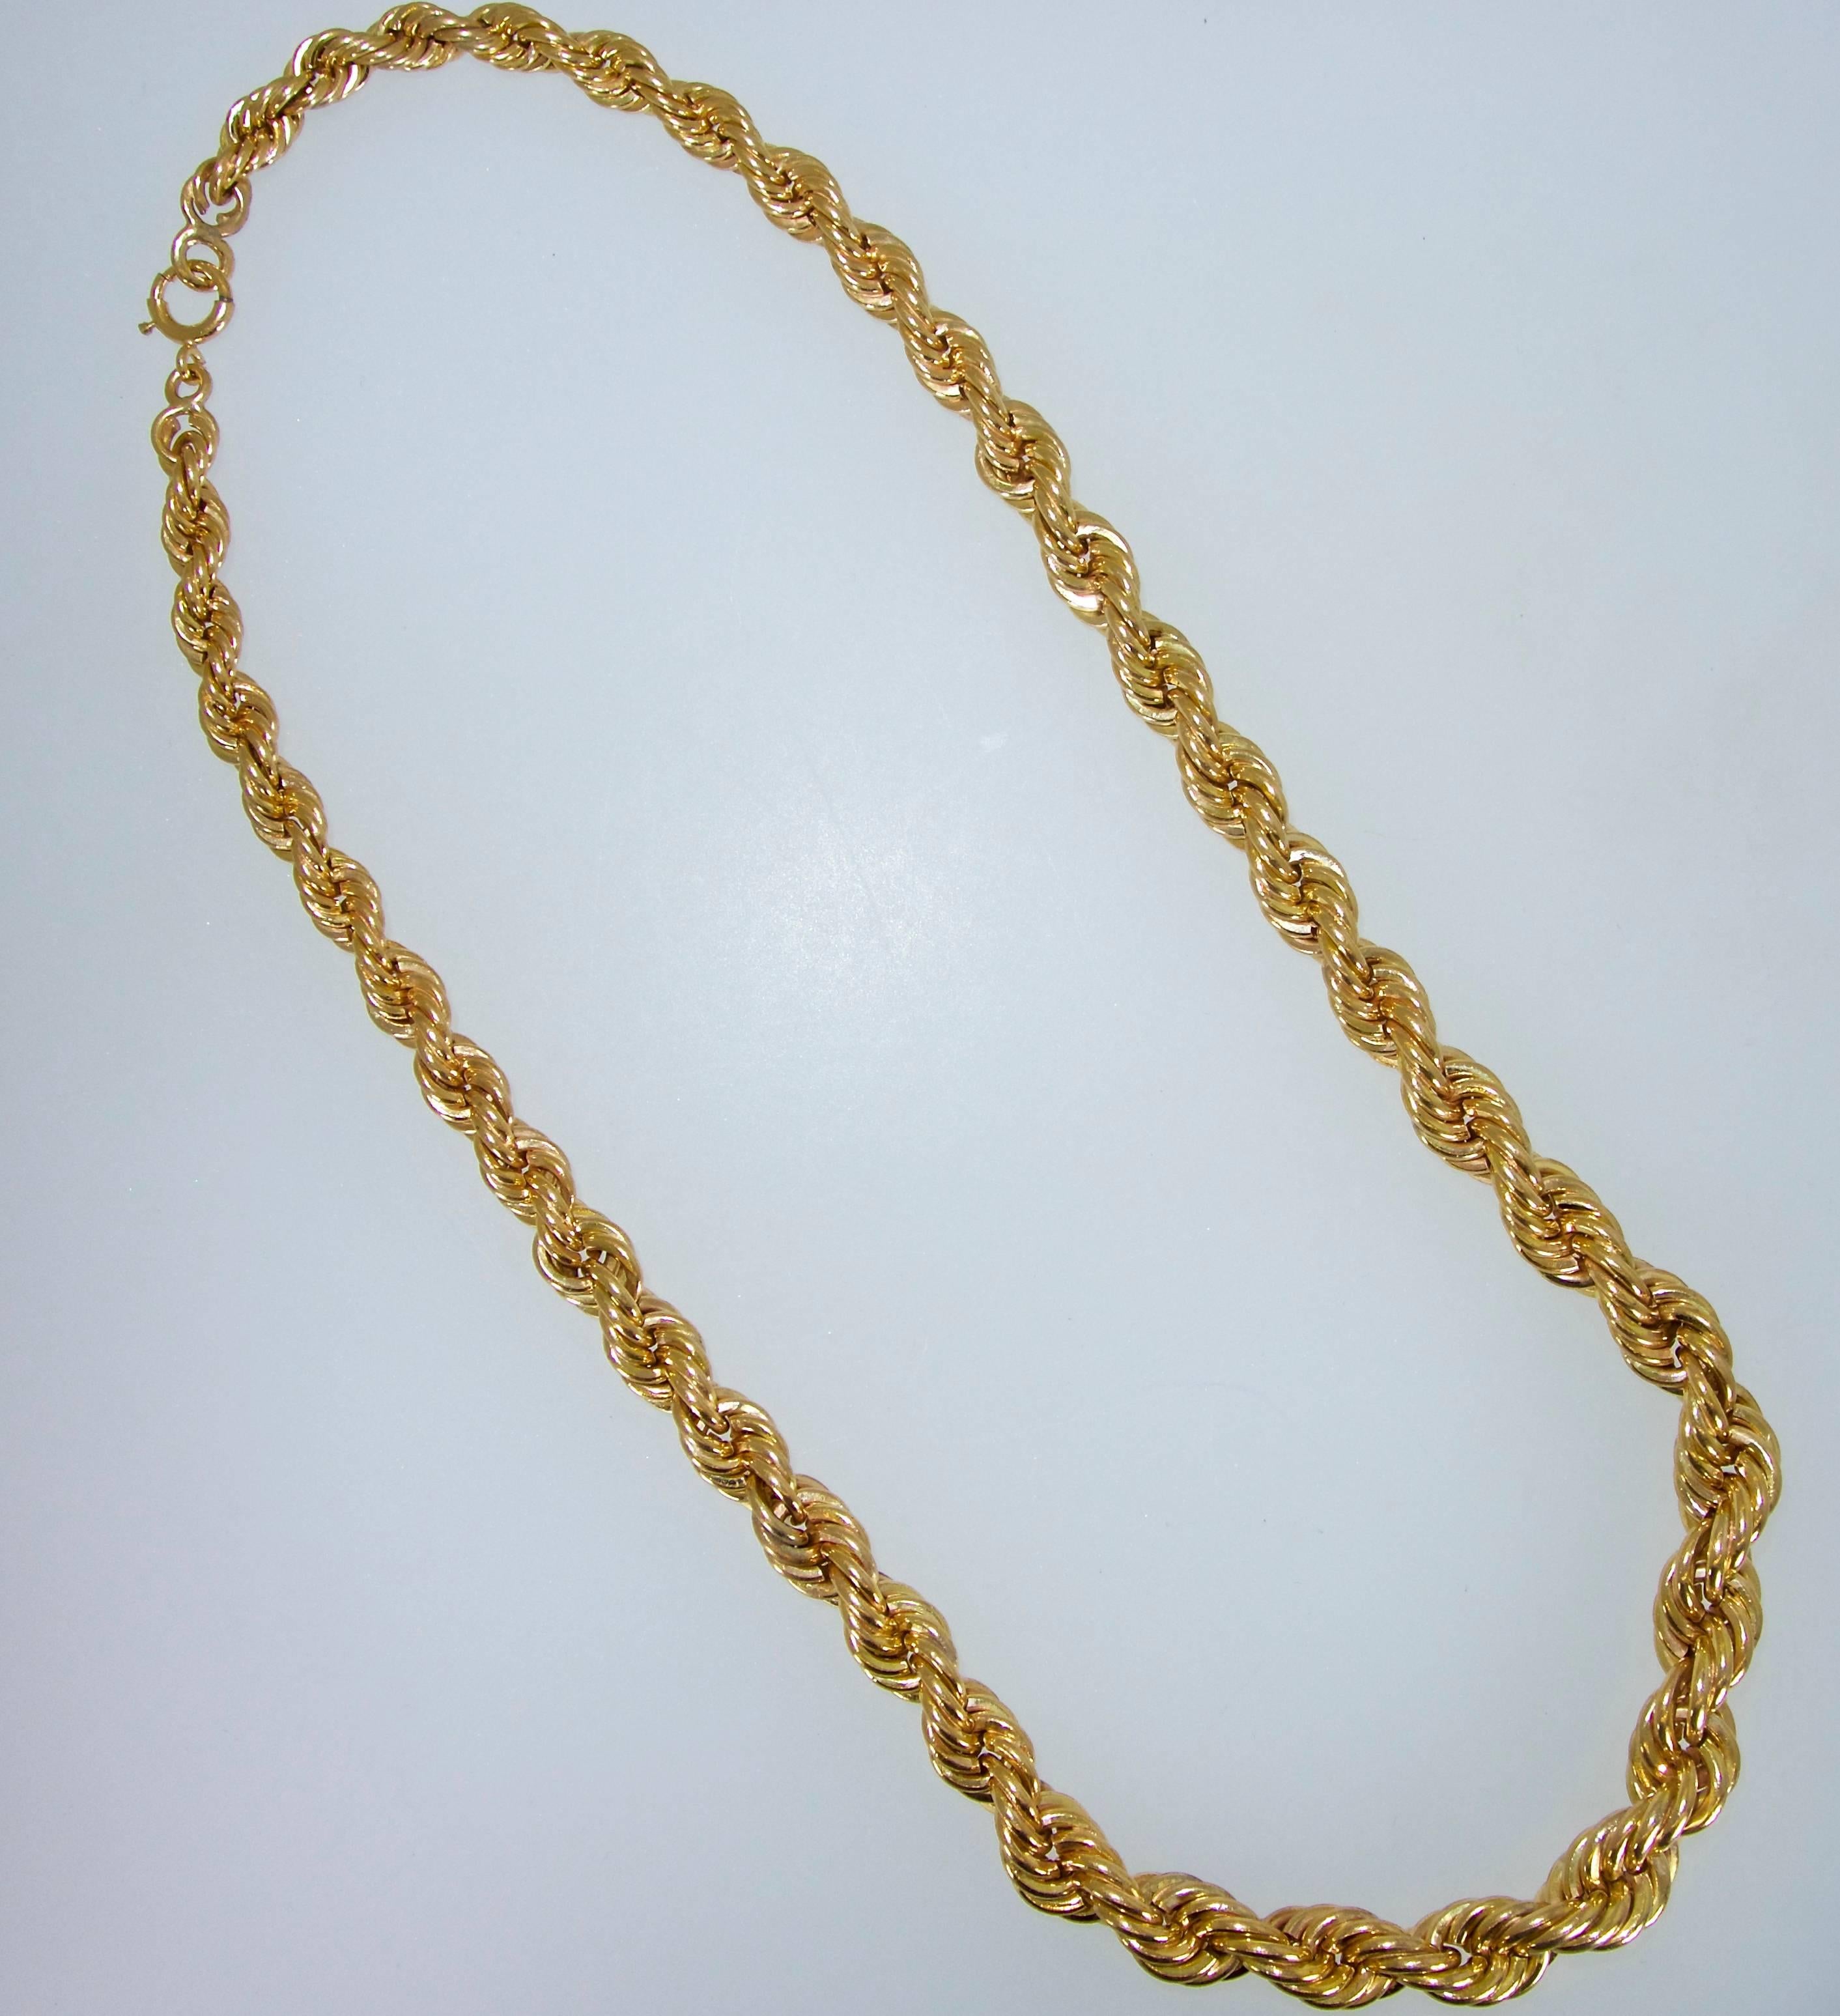 14k with a unusual large twisted link design, 69.5 grams, 16 inches in length with a spring and jump ring clasp.